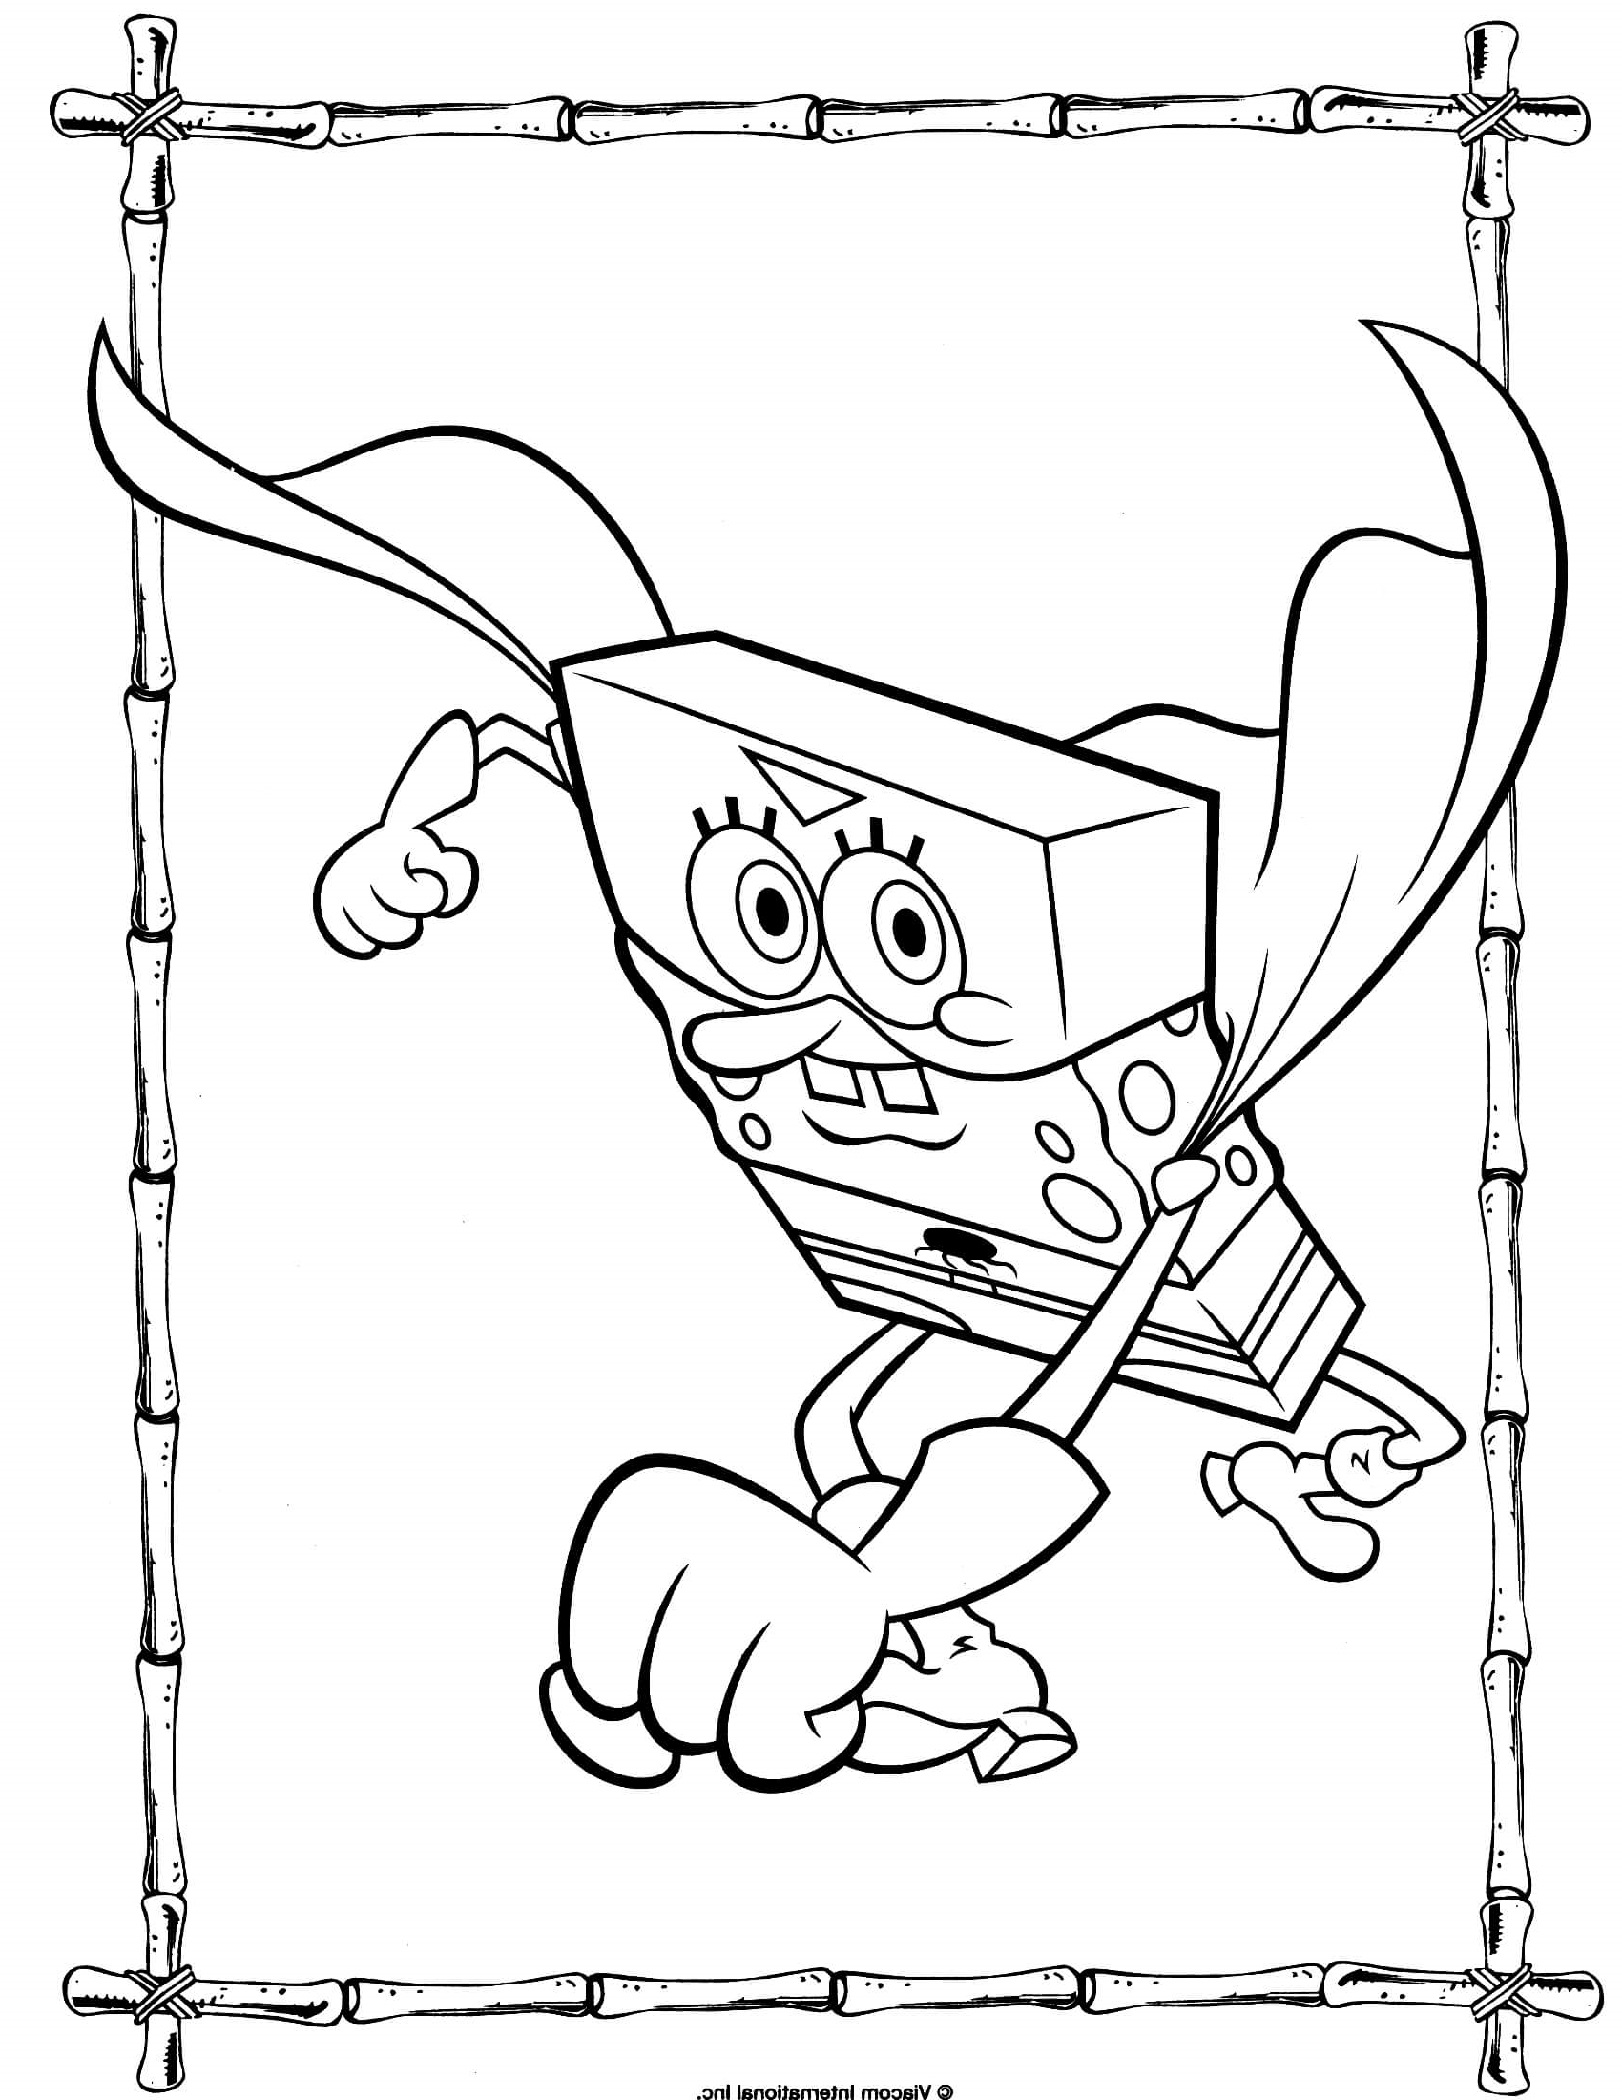 Spongebob Coloring Pages Free